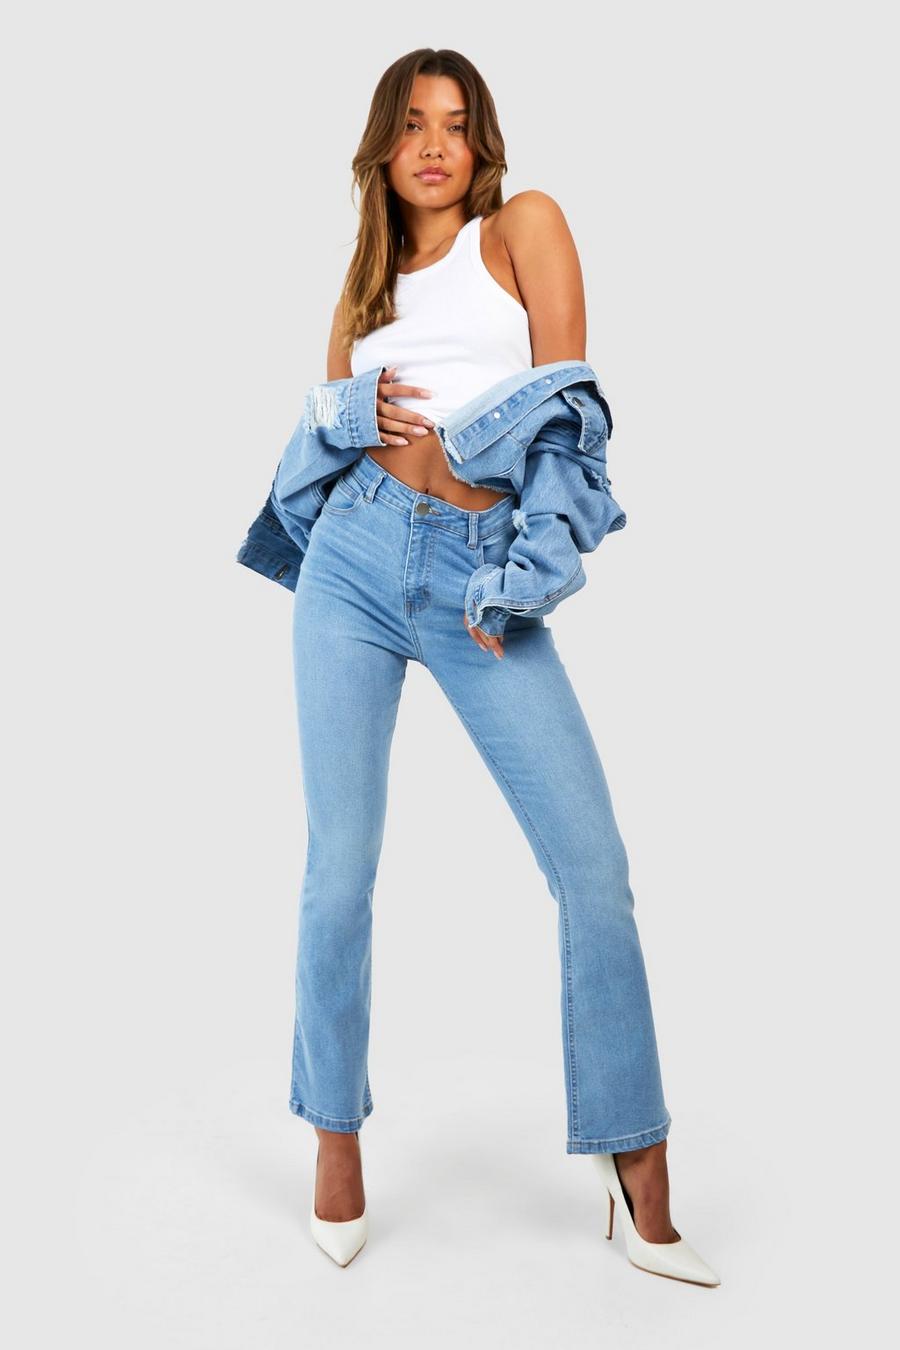 Buy KDF High Waisted Flare Jeans for Women Bell Bottom Jeans with Belt for  Women Stretch Wide Leg Jeans, #024_light Blue(with Belt), 10 at